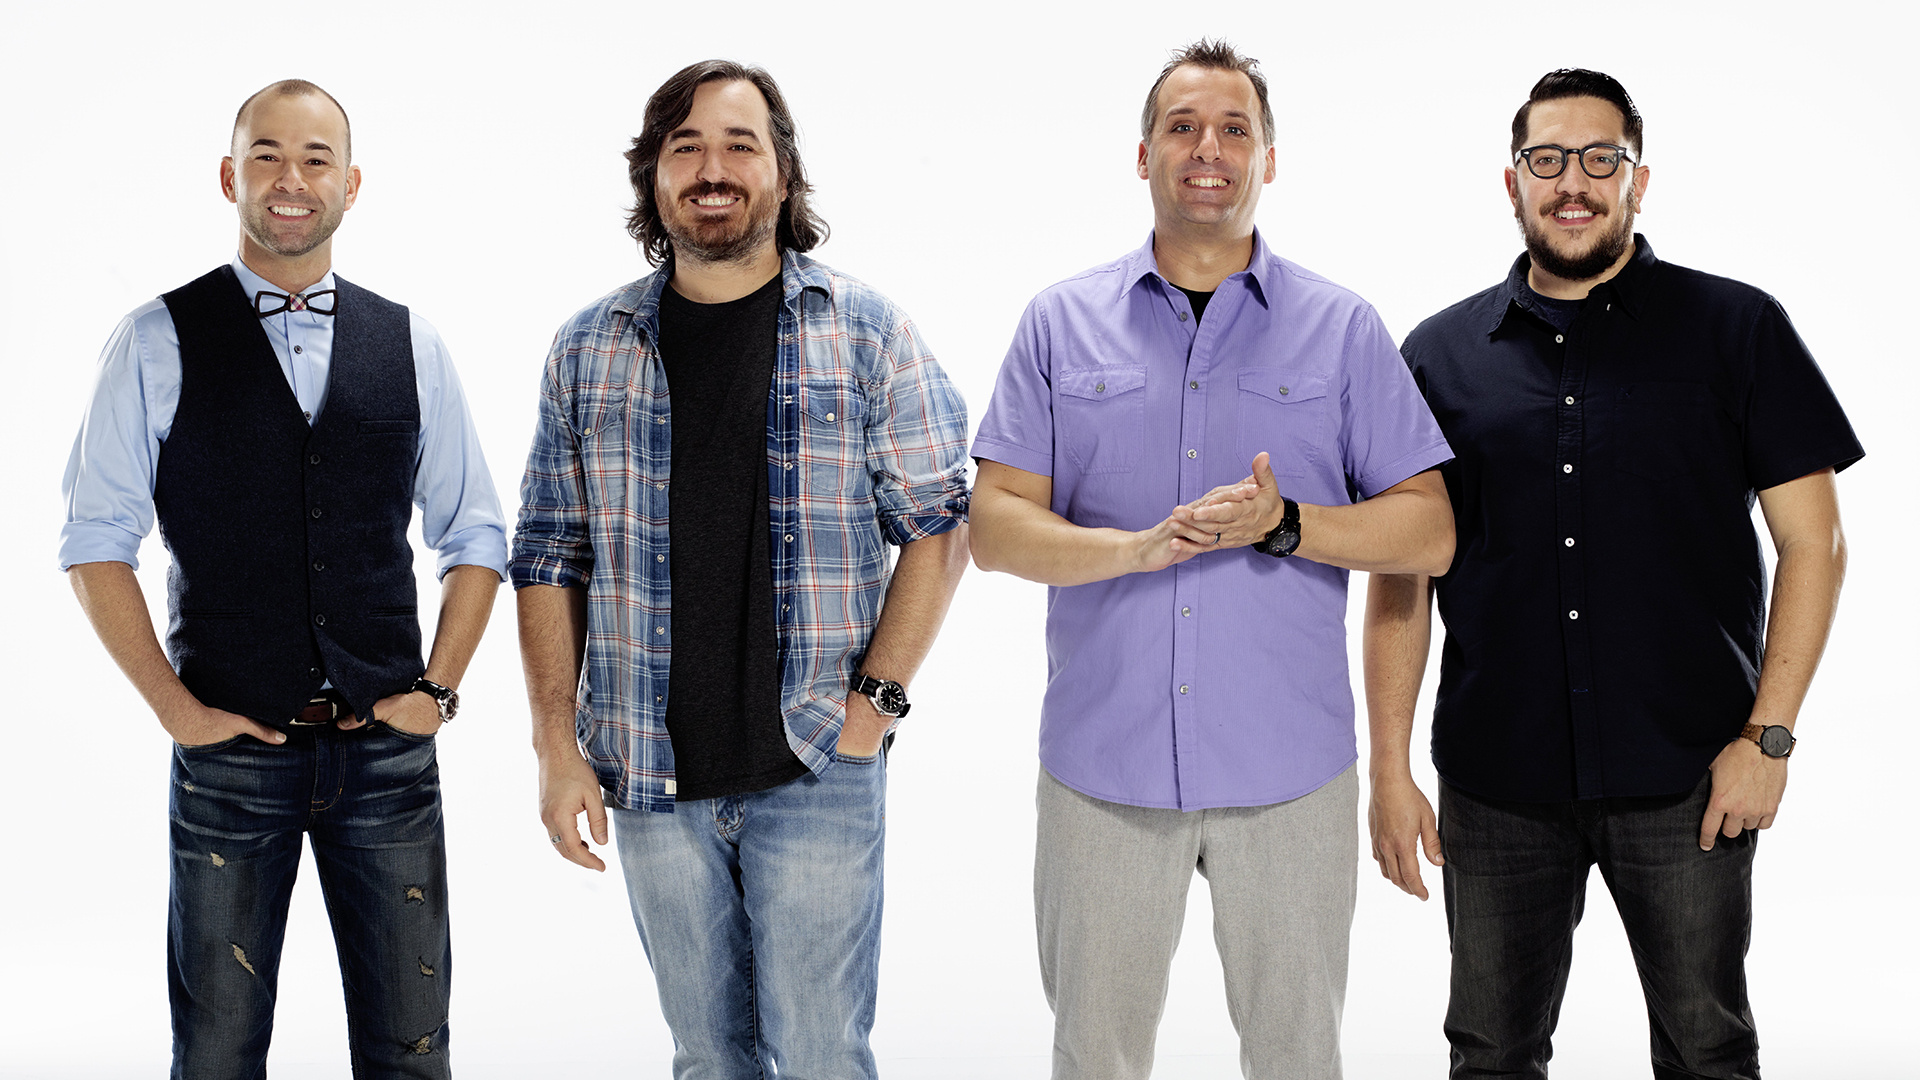 Impractical Jokers wallpapers, Ethan Anderson's collection, Fan creations, Comedic entertainment, 1920x1080 Full HD Desktop